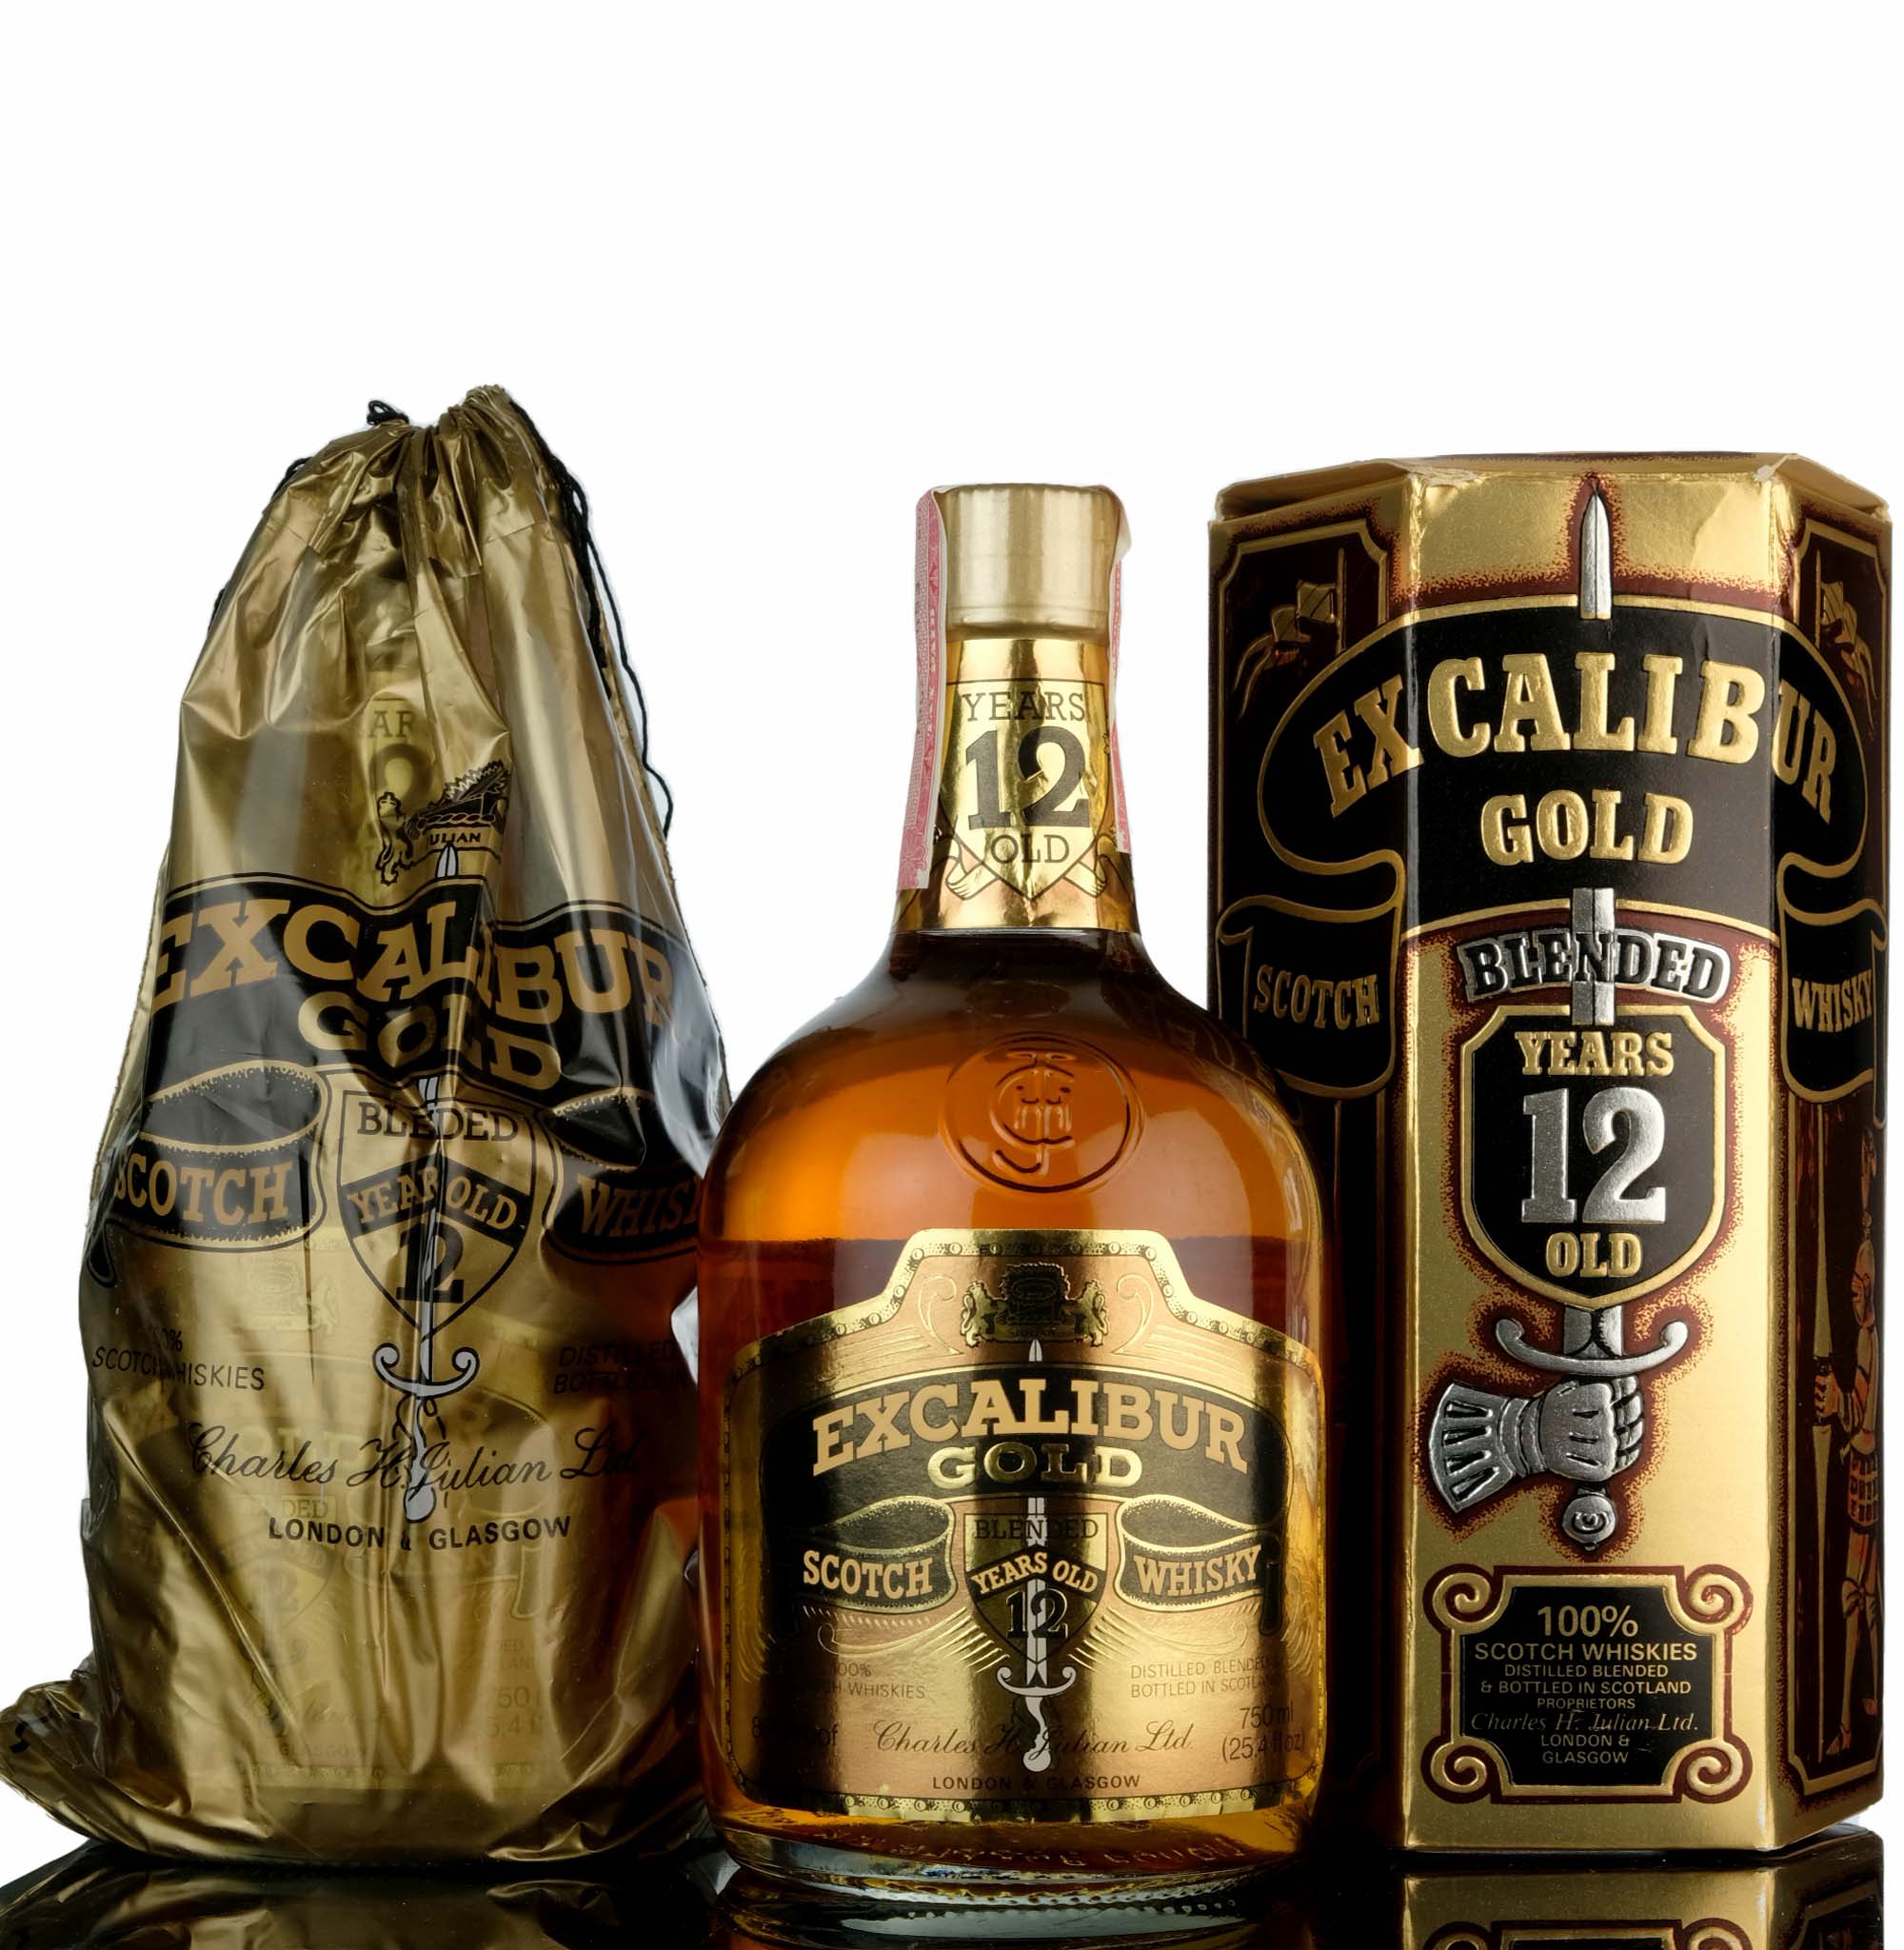 Excalibur Gold 12 Year Old - 1983 Release